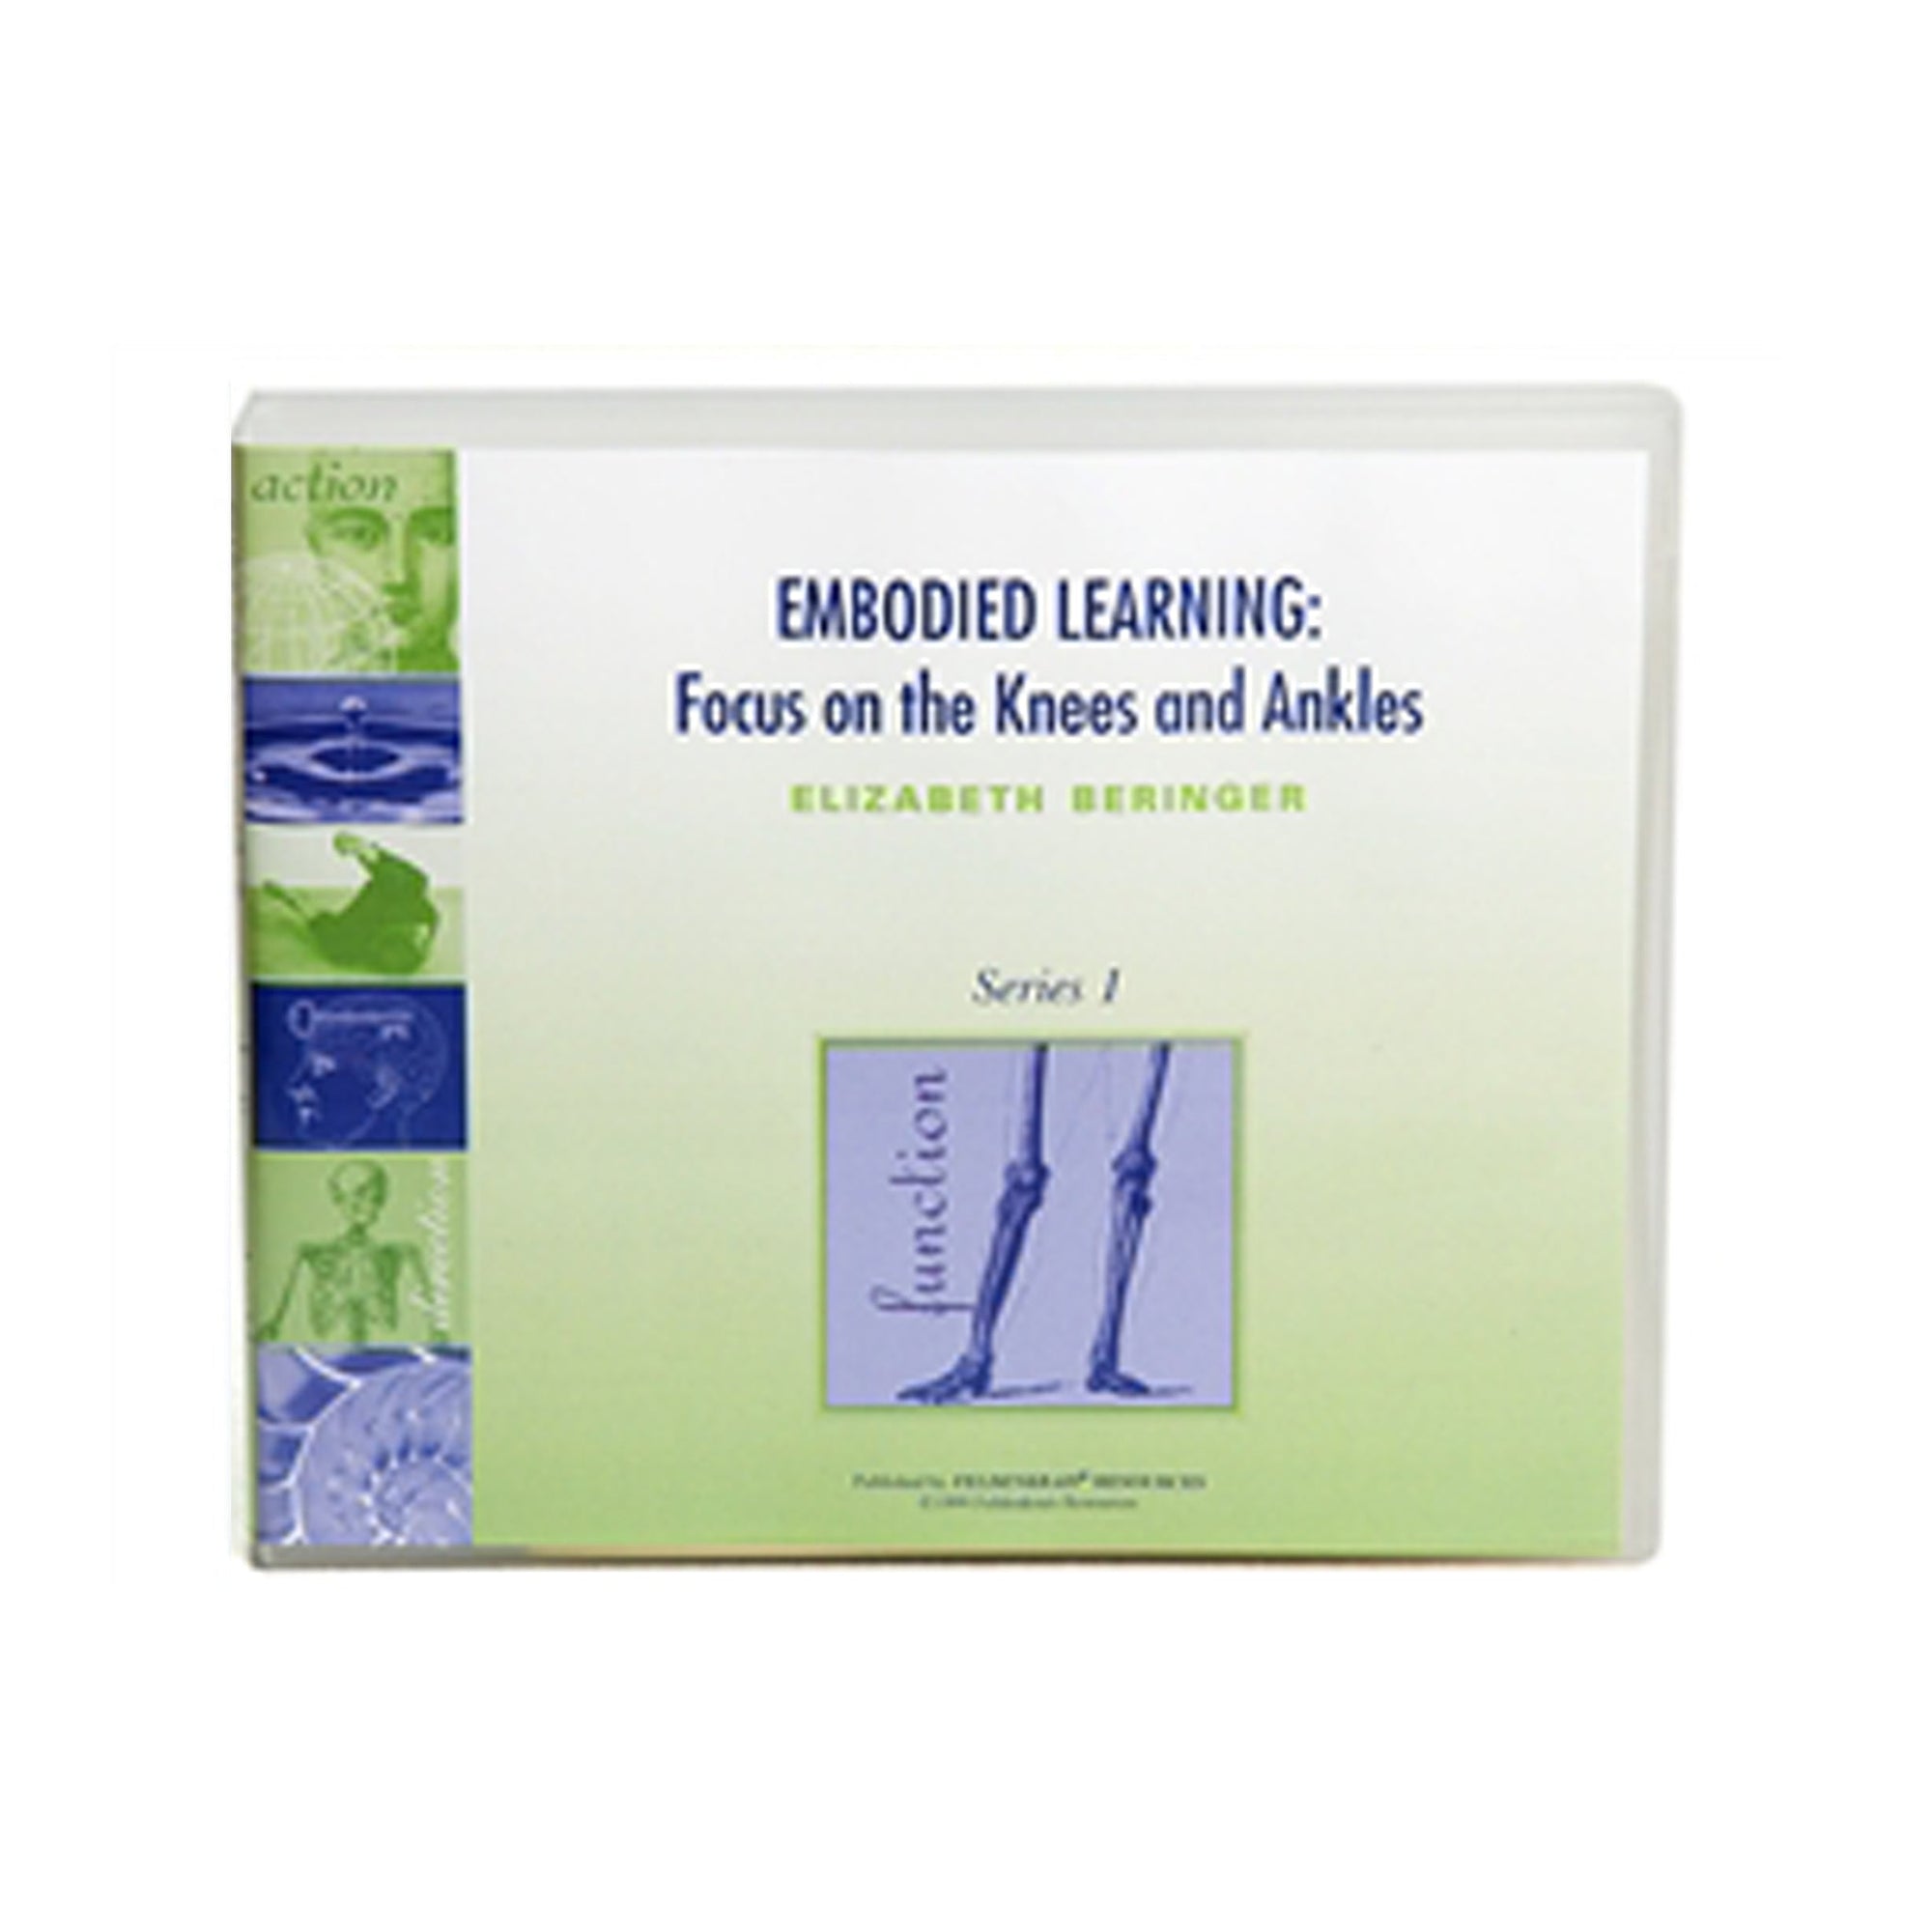 Embodied Learning: Focus on the Knees and Ankles, Volume I (For Practitioners)